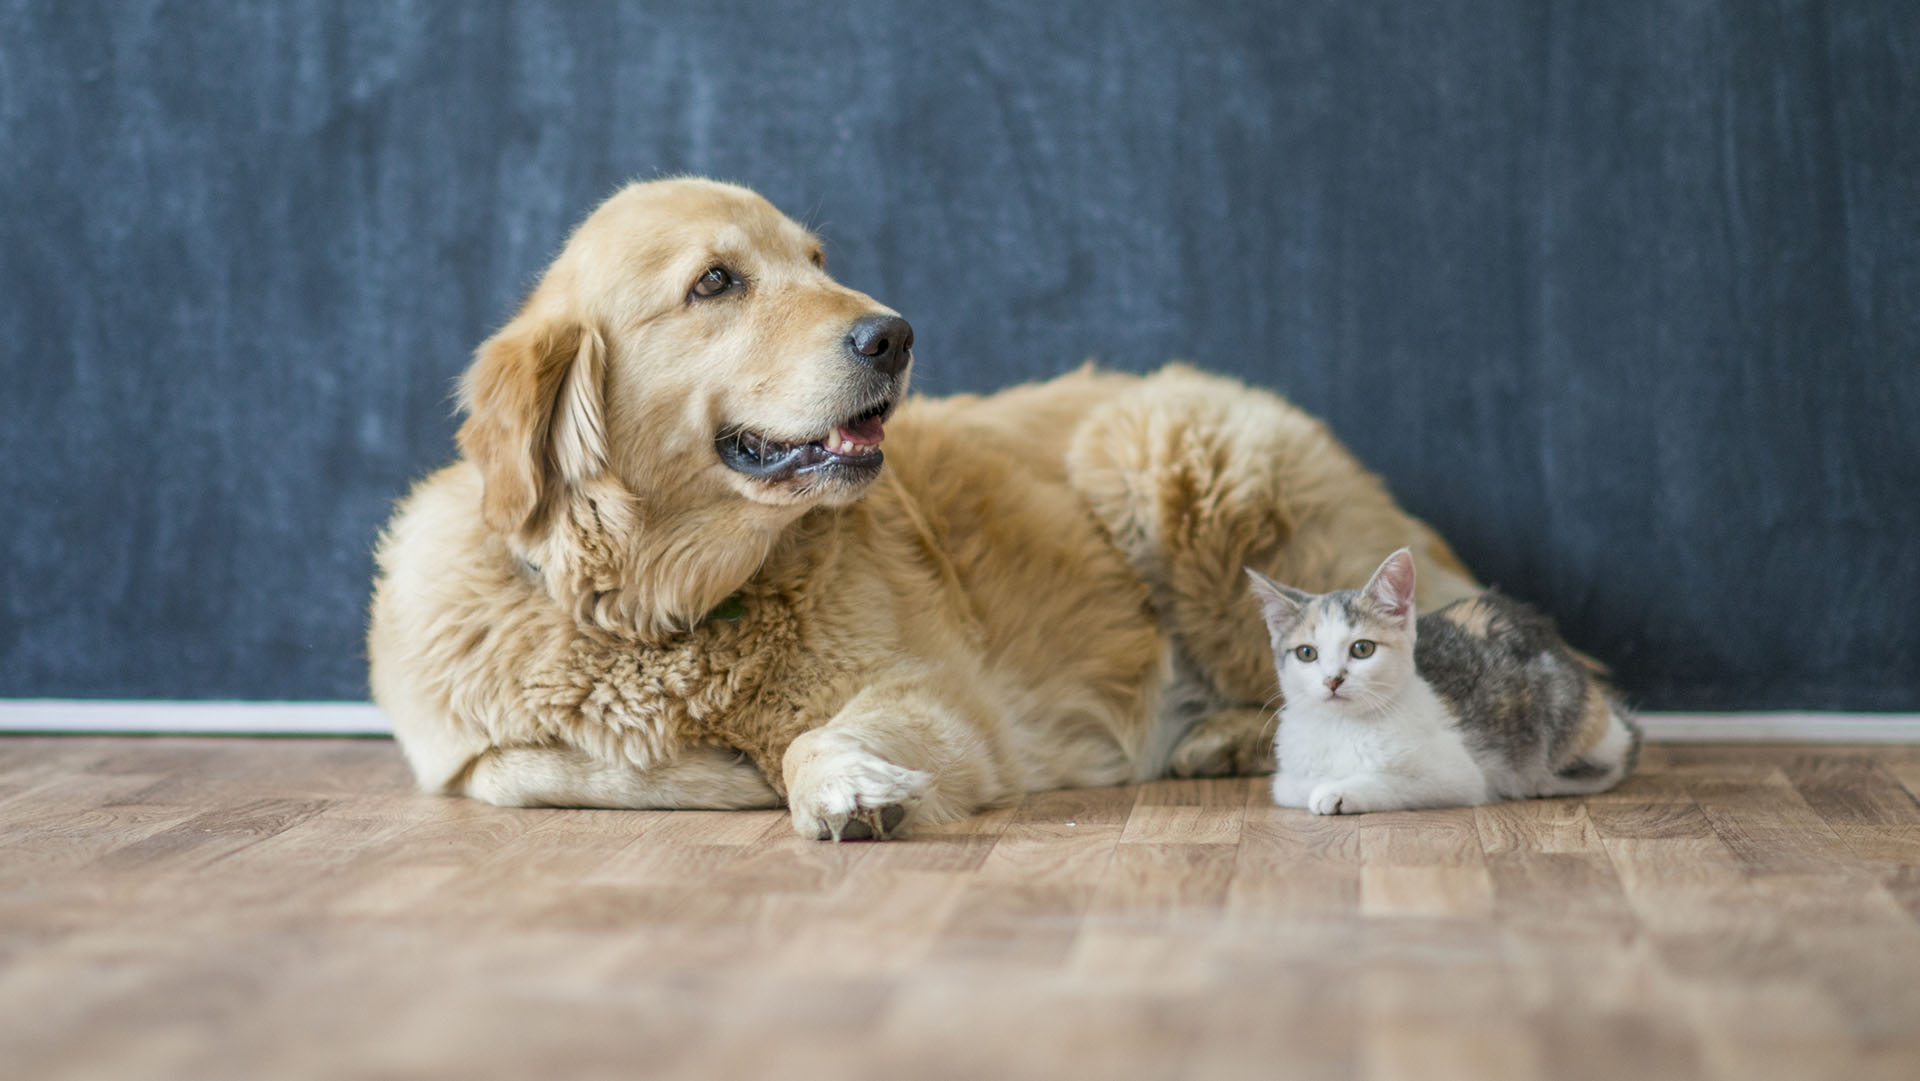 A golden retriever and a cat is sitting in a home after a pet adoption.